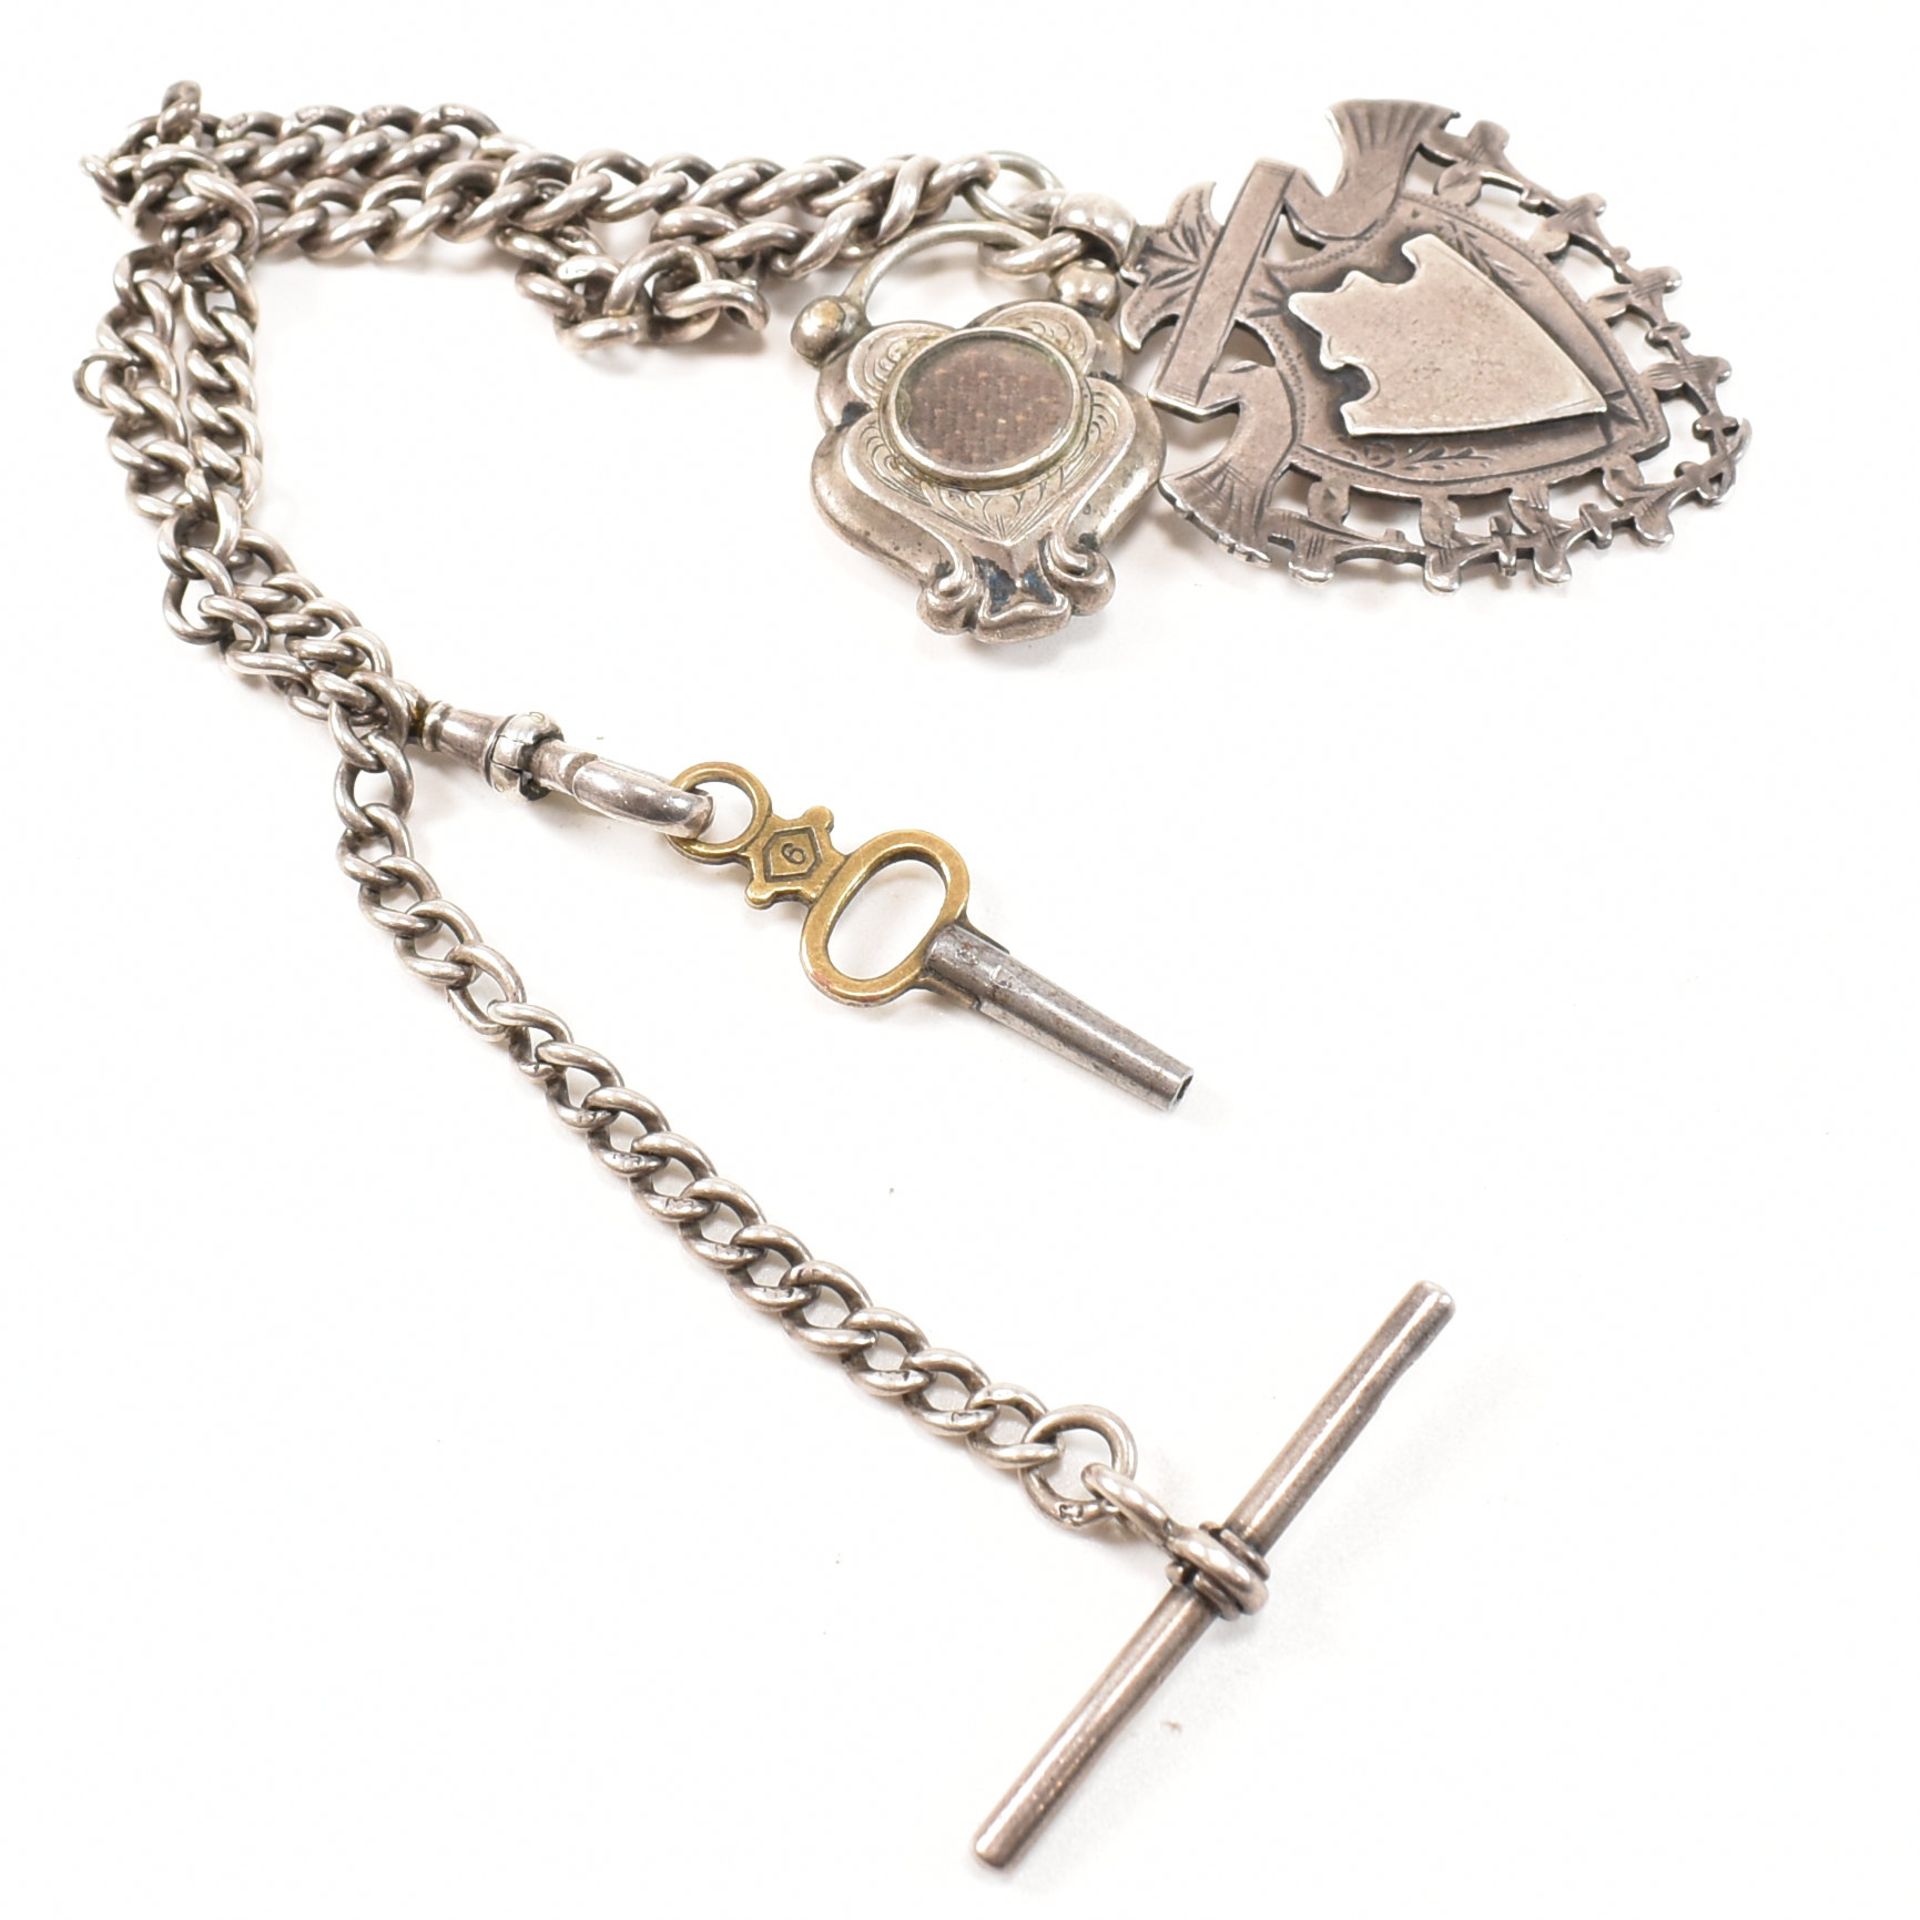 VICTORIAN SILVER POCKET WATCH ON CHAIN WITH KEY & FOBS - Image 3 of 5